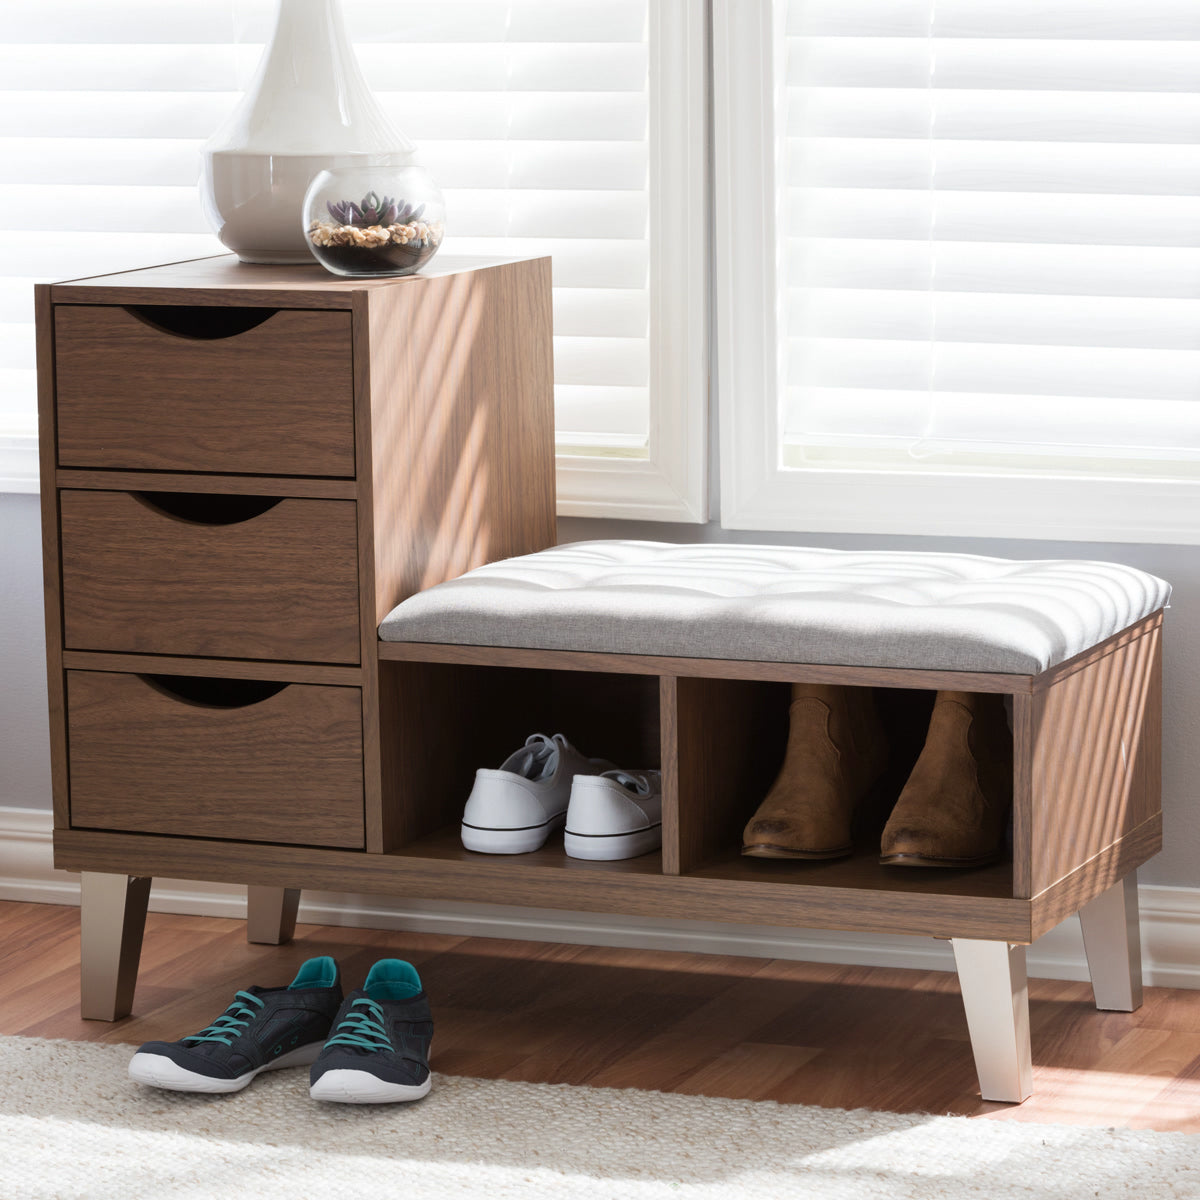 Baxton Studio Arielle Modern and Contemporary Walnut Wood 3-Drawer Shoe Storage Grey Fabric Upholstered Seating Bench with Two Open Shelves Baxton Studio-0-Minimal And Modern - 7